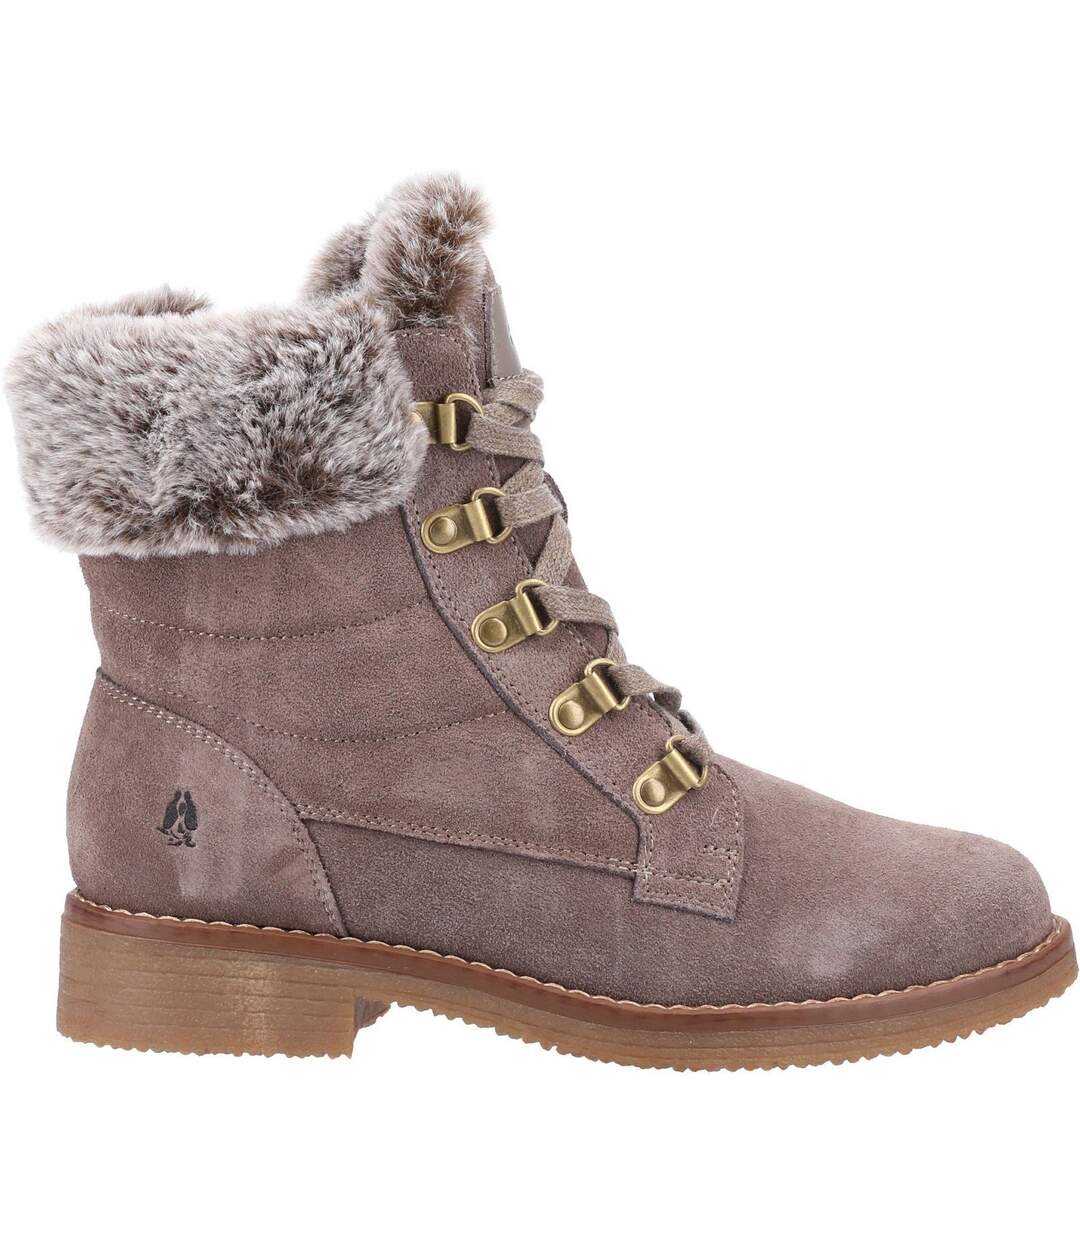 Hush Puppies Womens/Ladies Florence Mid Boots (Taupe) - UTFS8285